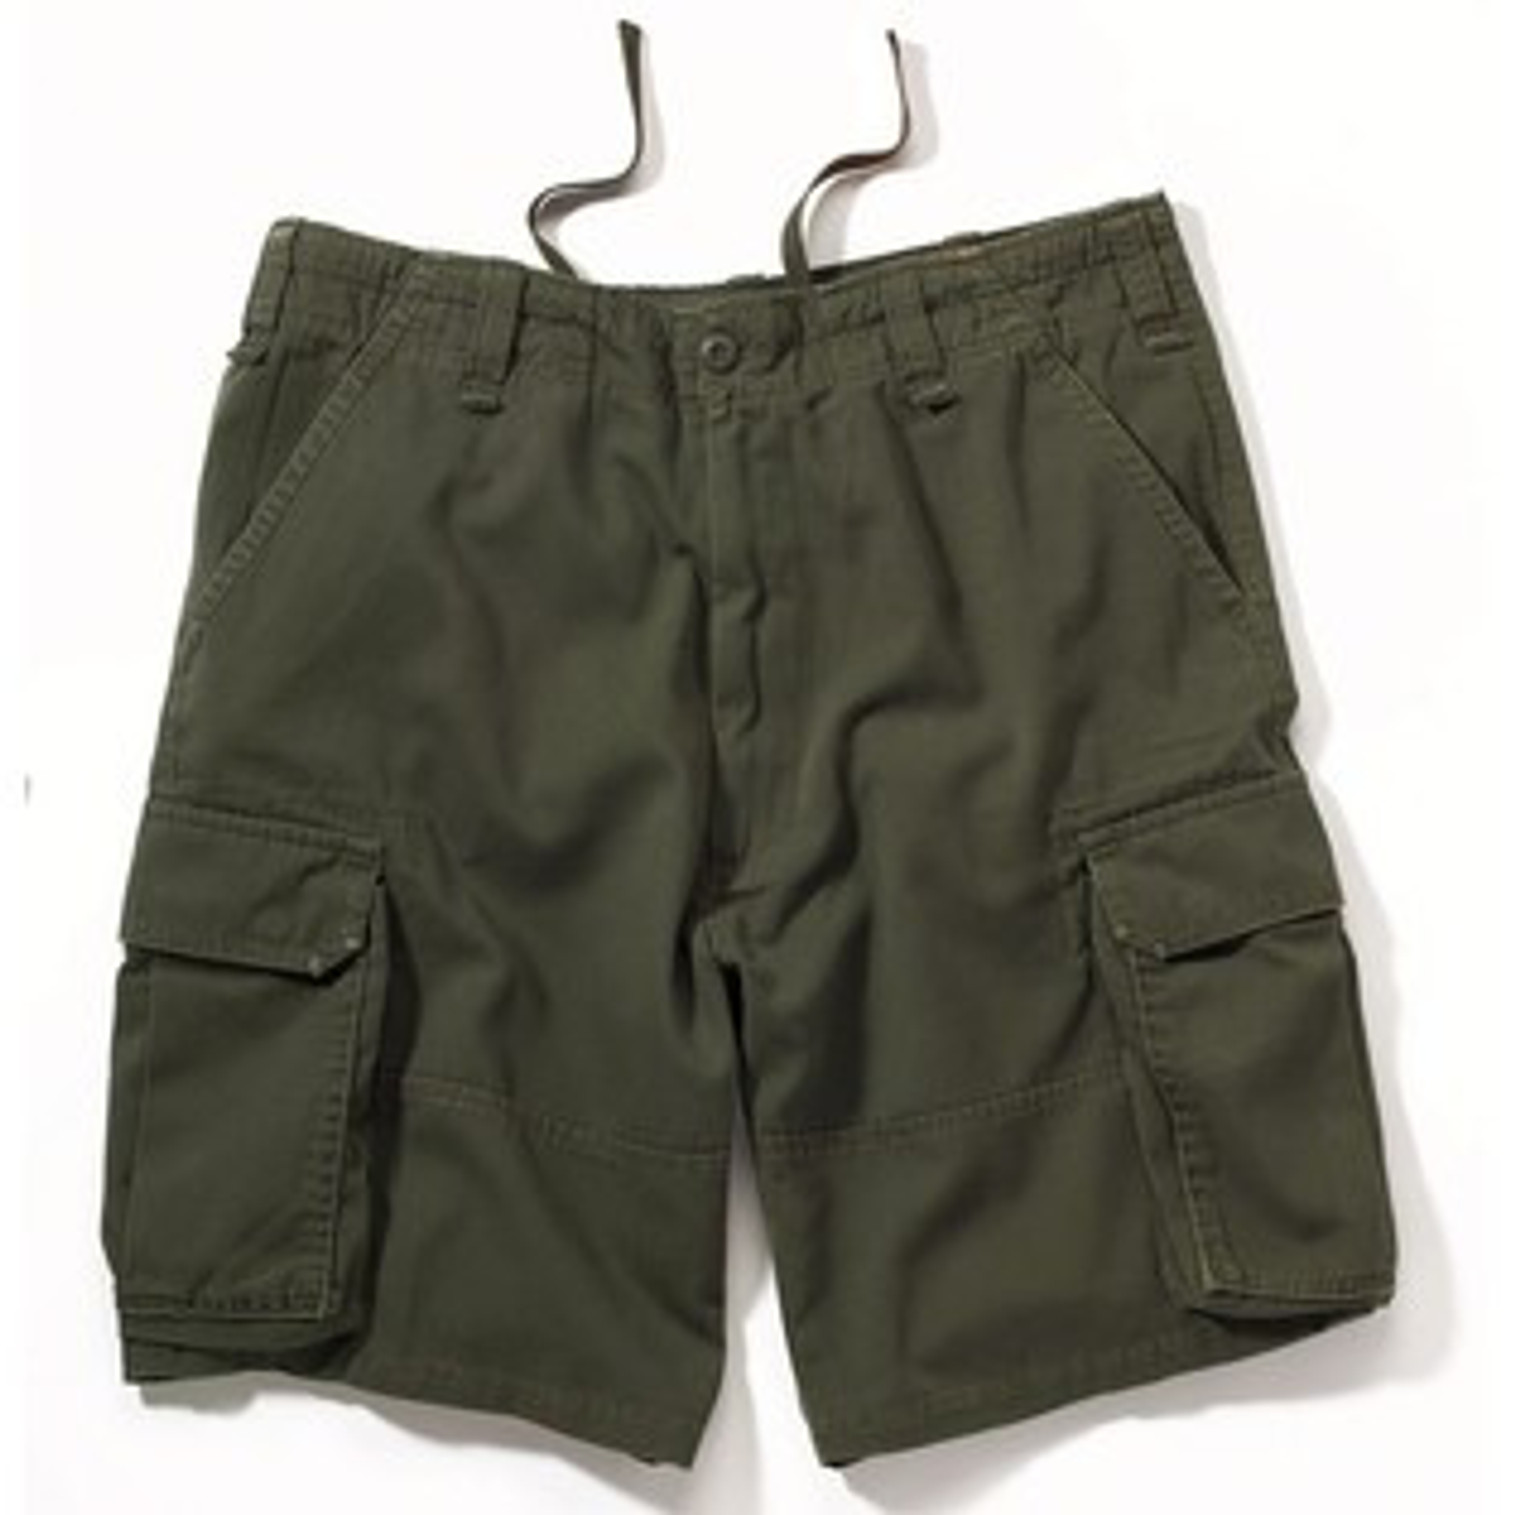 Rothco Vintage Solid Paratrooper Cargo Shorts - Olive Drab